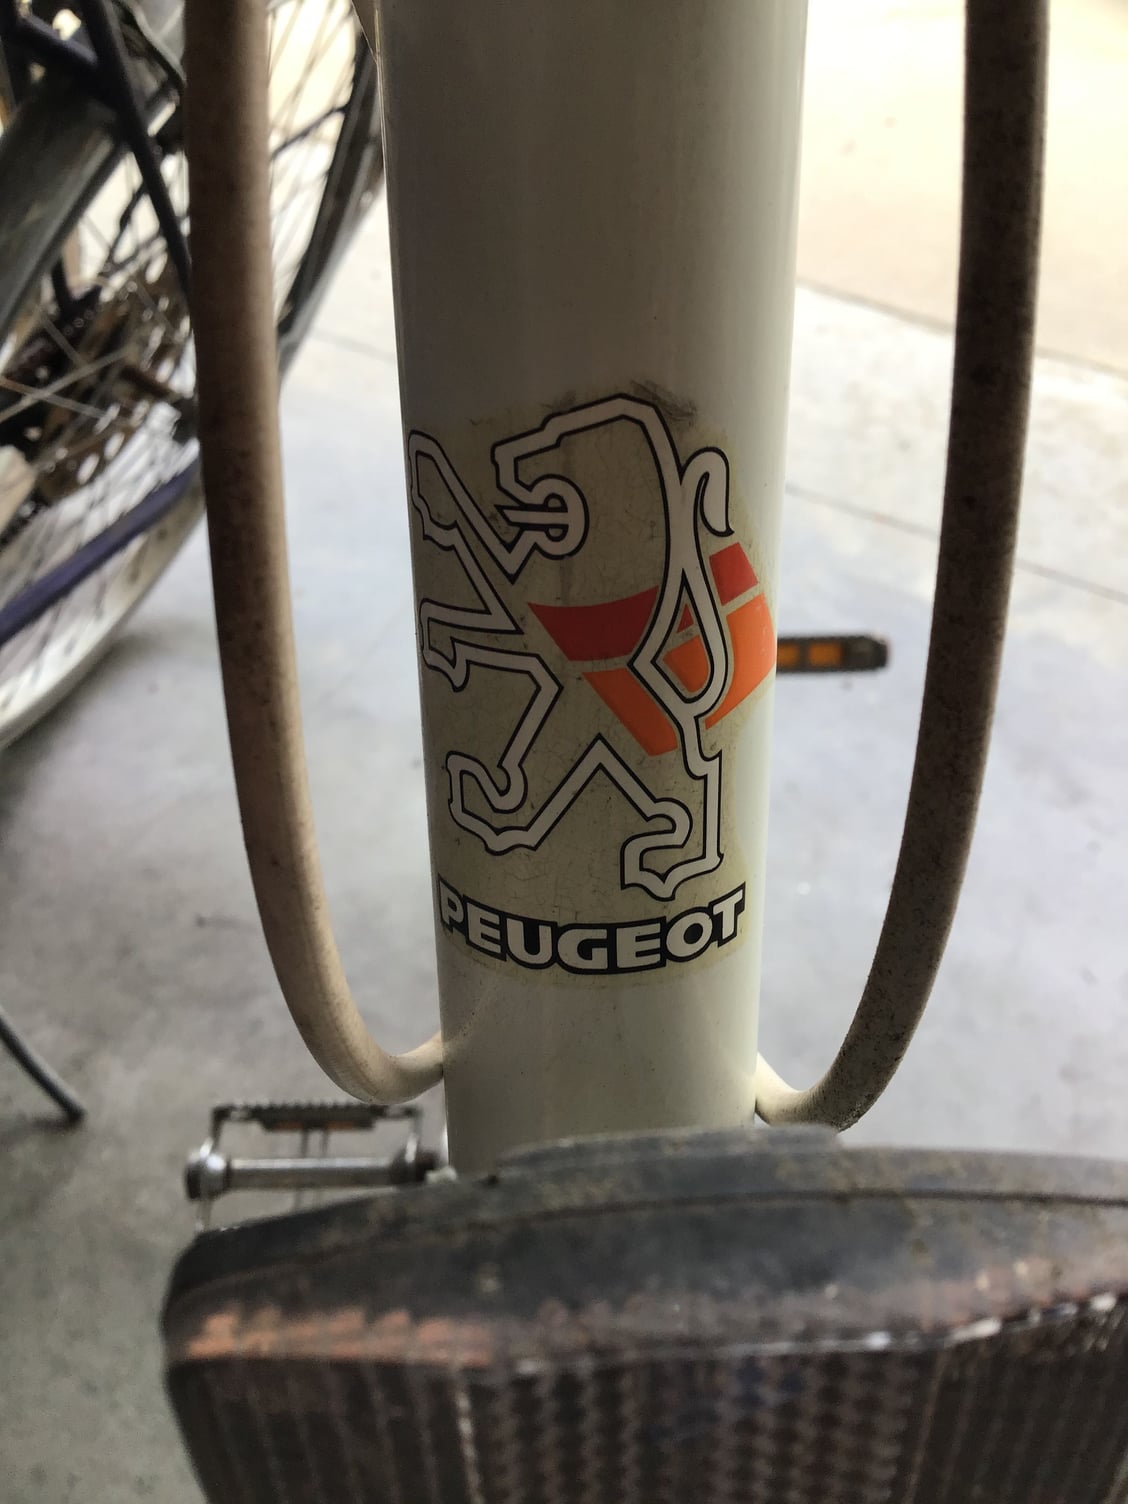 where can i find the serial number on a bicycle